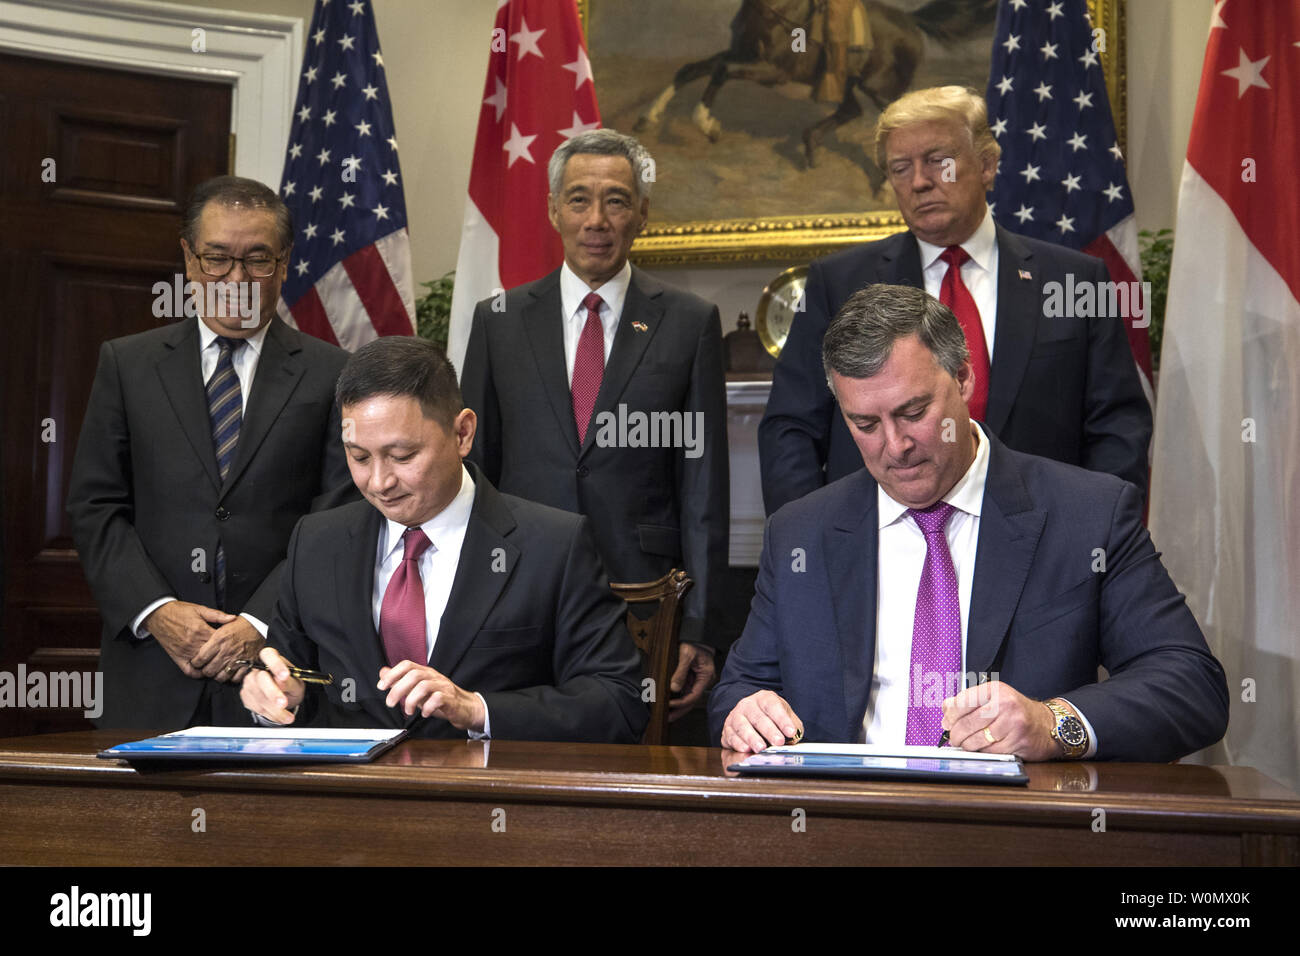 Boeing Executive Vice President Kevin McAllister (R) and CEO of Singapore Airlines Goh Choon Phong (C-L) along US President Donald Trump (C-R) and Lee Hsien Loong (C) of Singapore attend a signing ceremony for airplane sales in the Roosevelt Room at the White House in Washington, DC, on October 23, 2017. The meeting comes less than two weeks before President Trump makes an extended trip to the Asia-Pacific region. . Photo by Jim Louis Scalzo/UPI Stock Photo